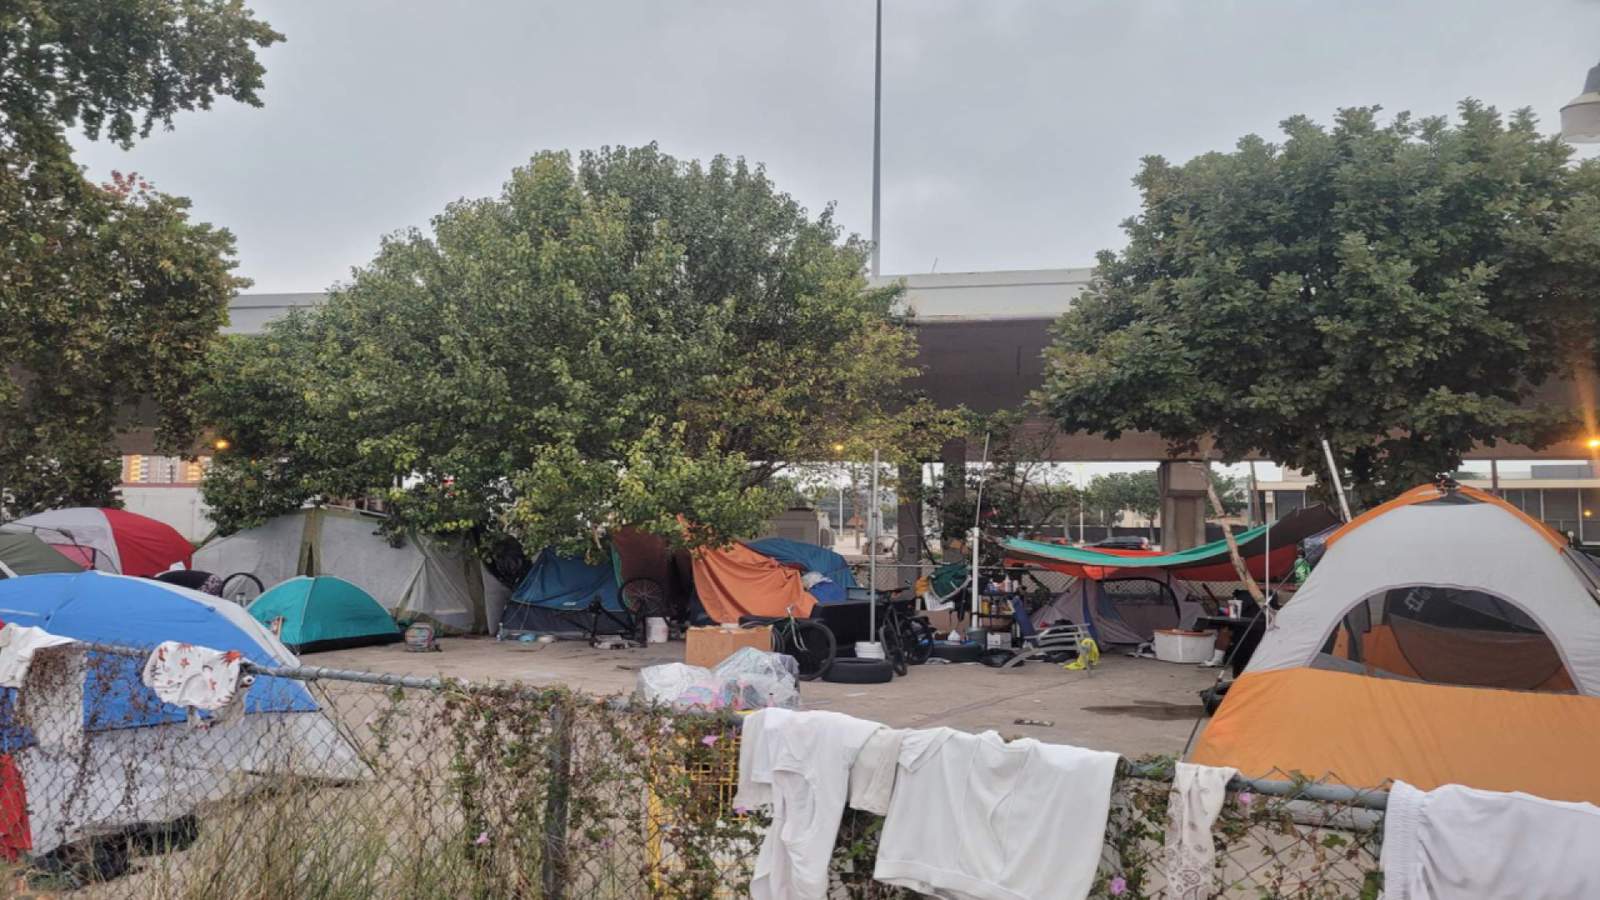 Pandemic puts downtown homeless encampments in plain sight